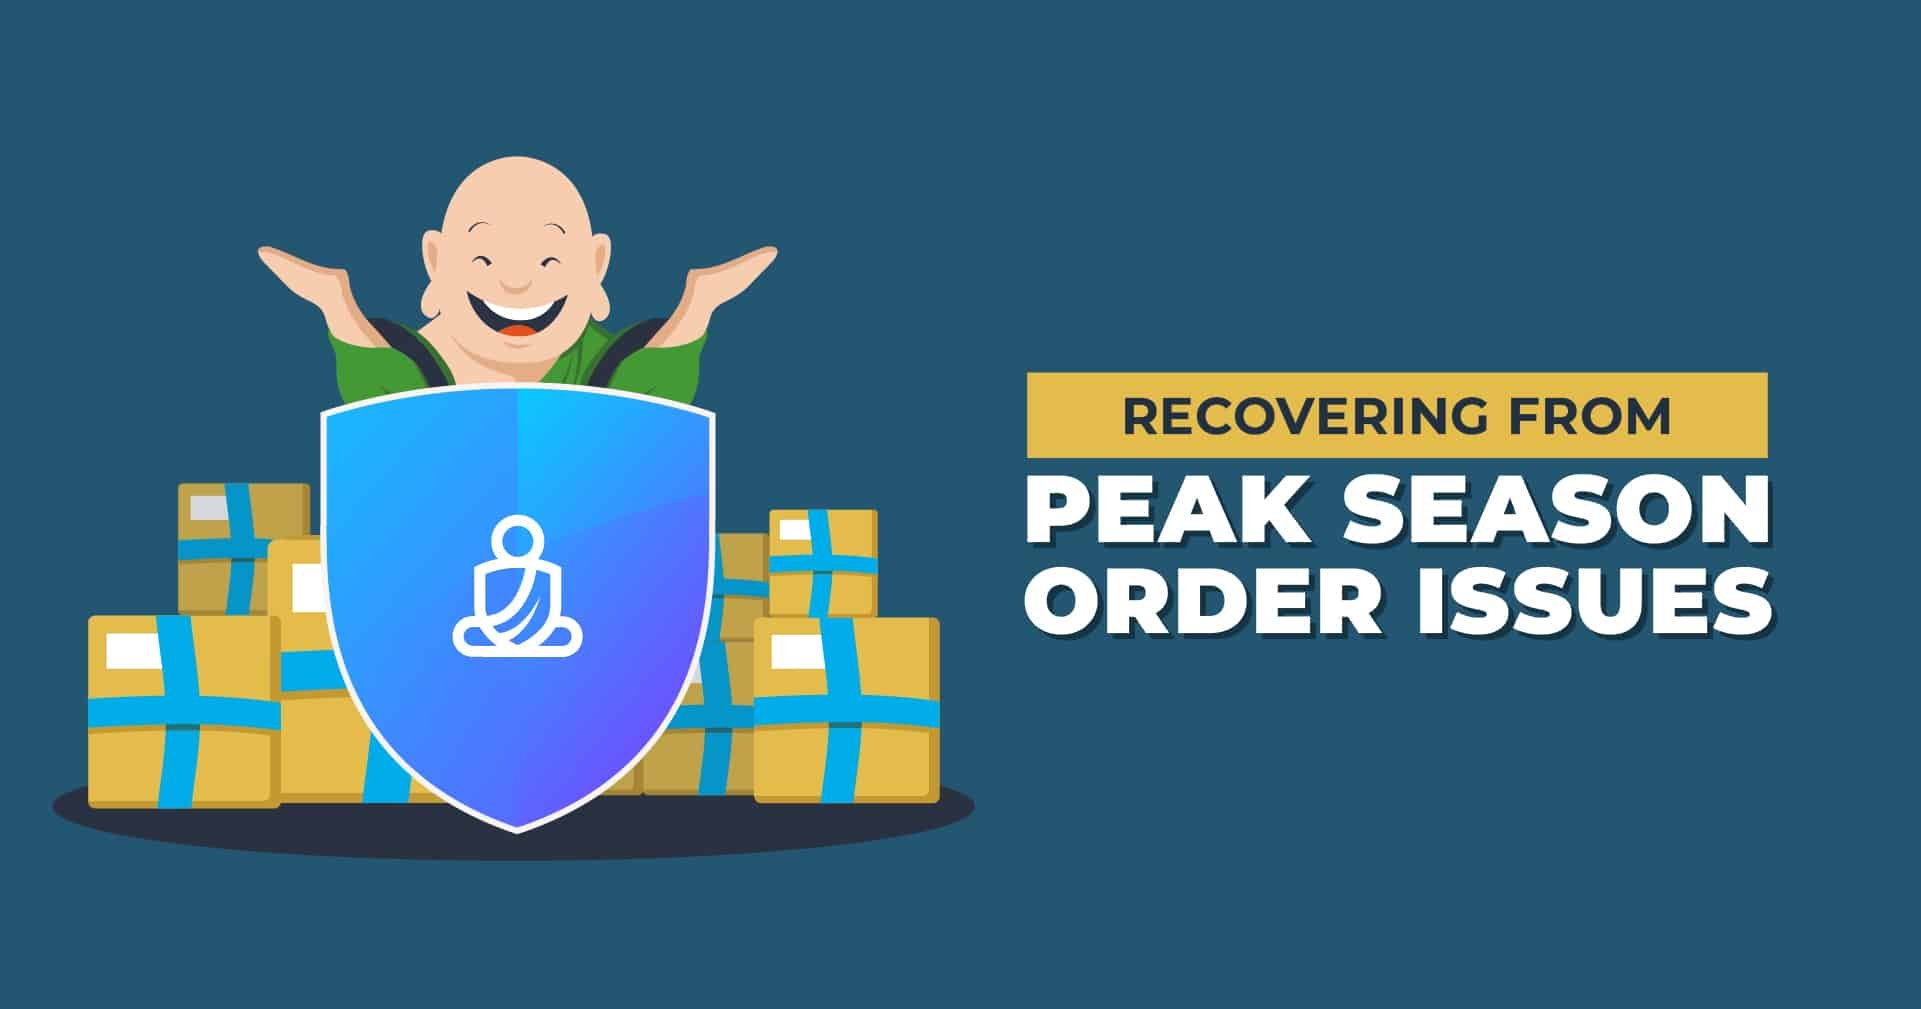 Recovering from Peak Season Order Issues